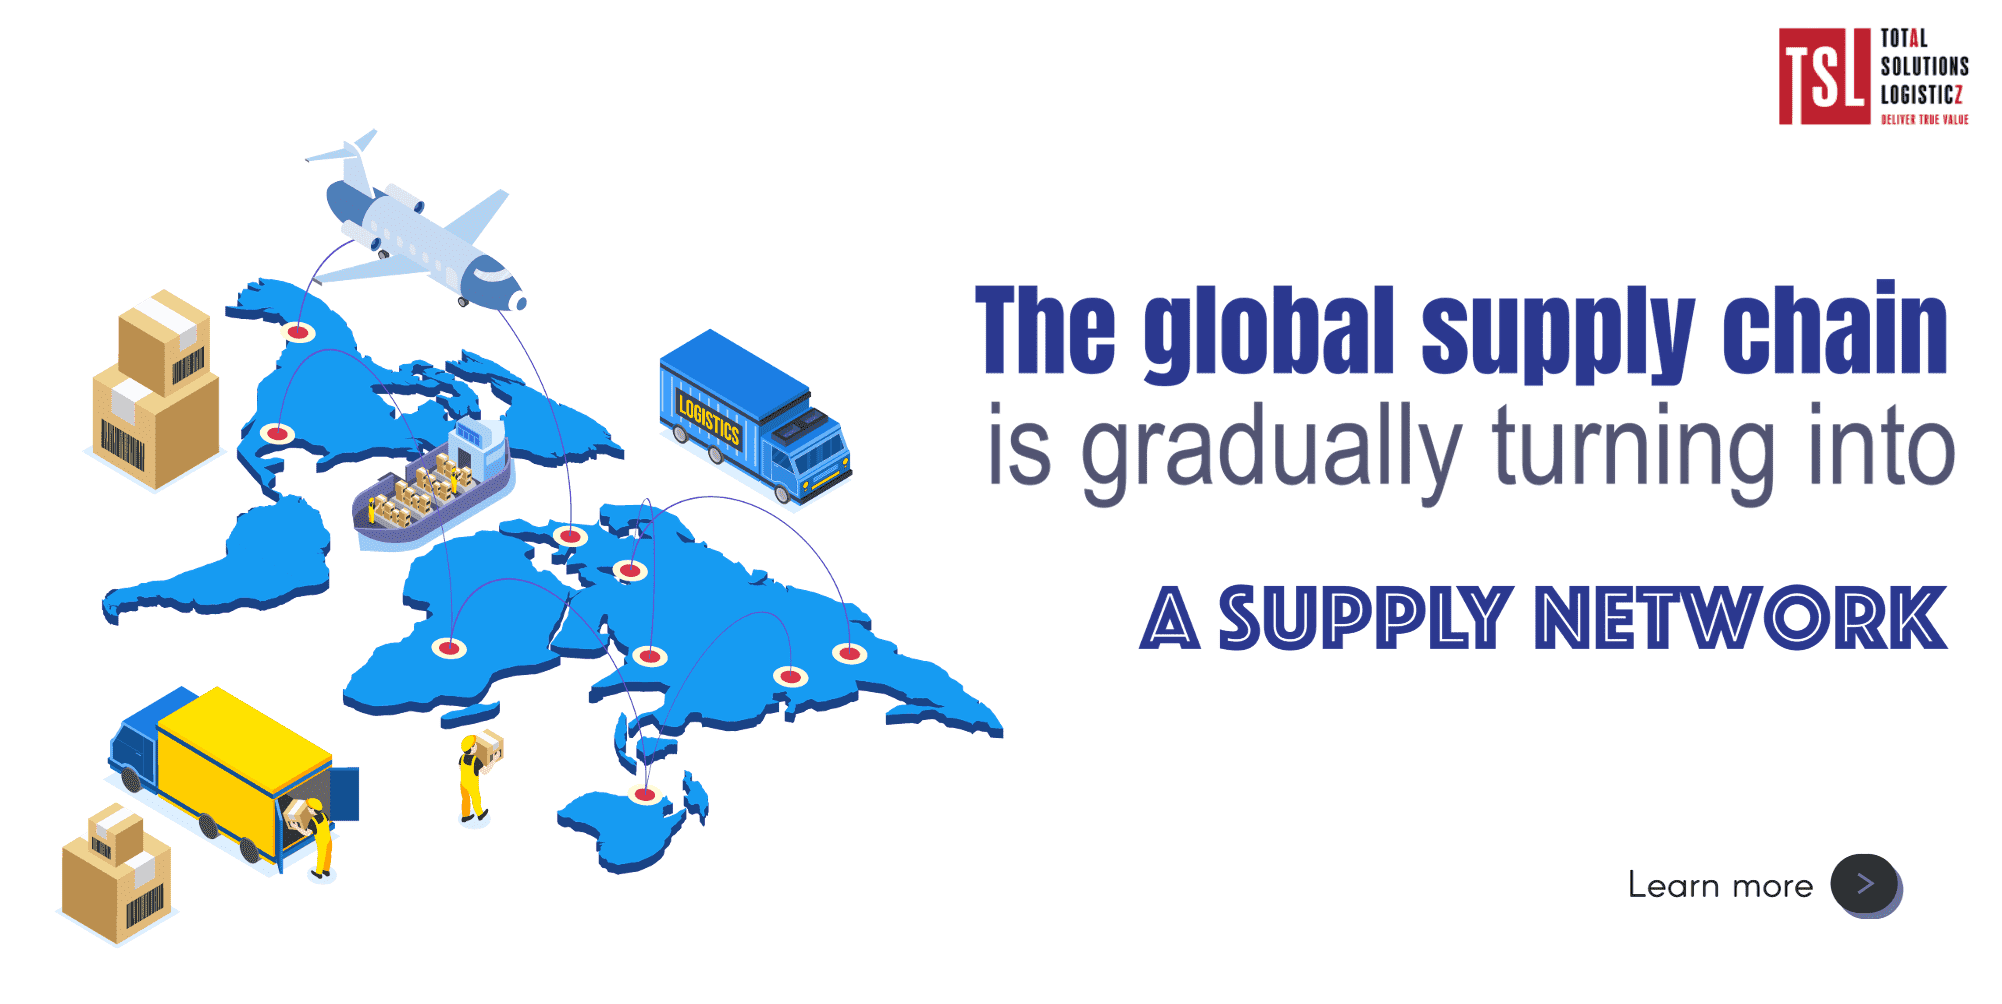 The global supply chain is gradually turning into a supply network